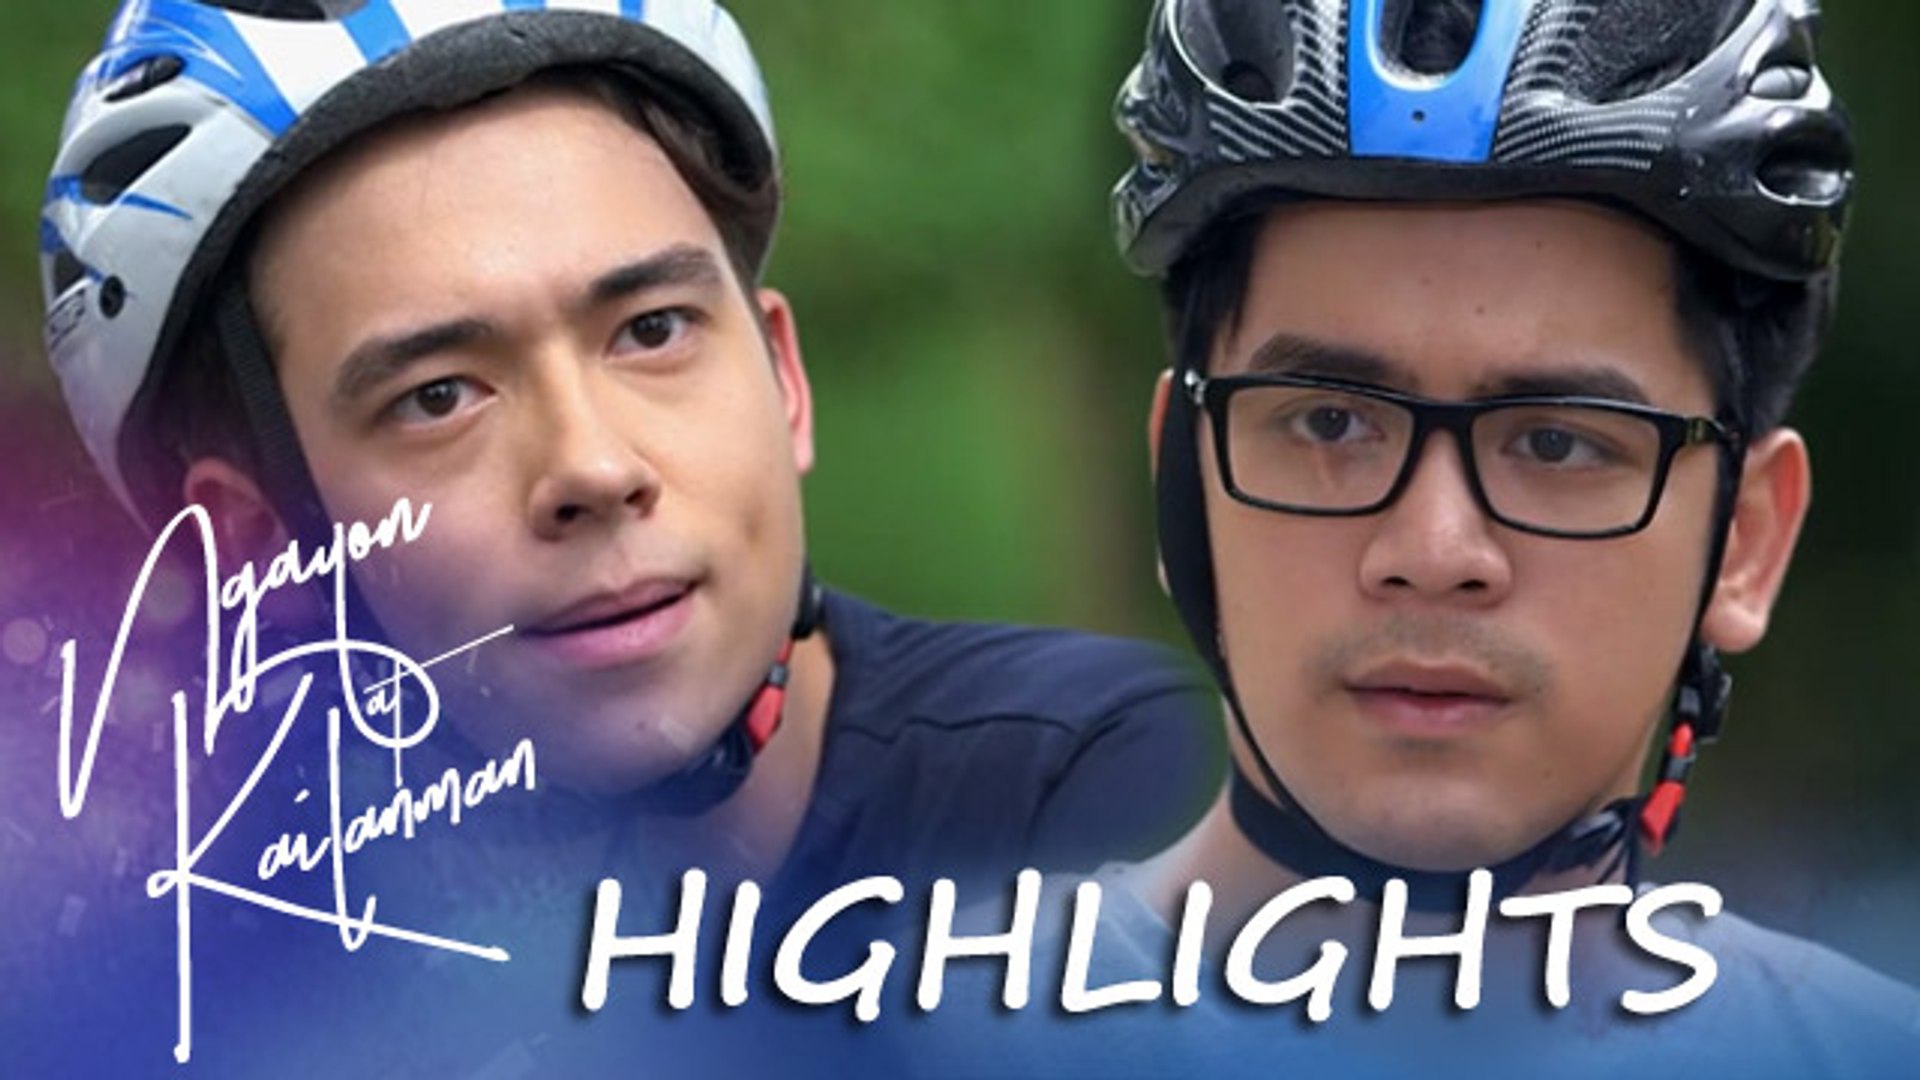 Ngayon at Kailanman: Inno tells Oliver that he and Eva are a couple | EP 77